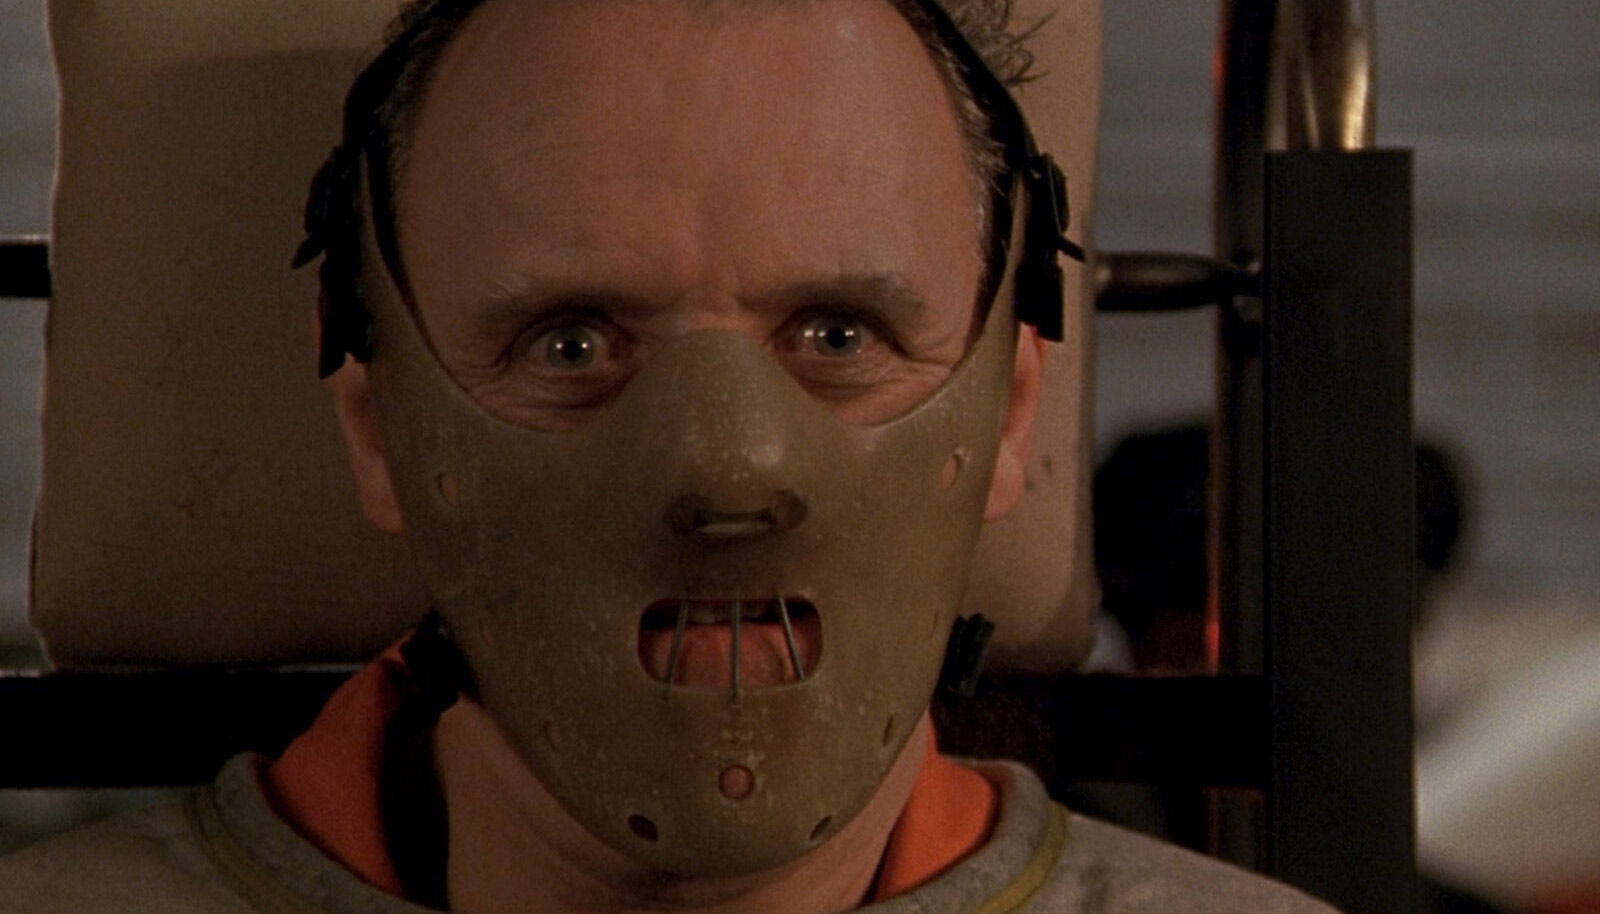 Mask for Dr. Hannibal Lecter in the movie Silence of the Lambs